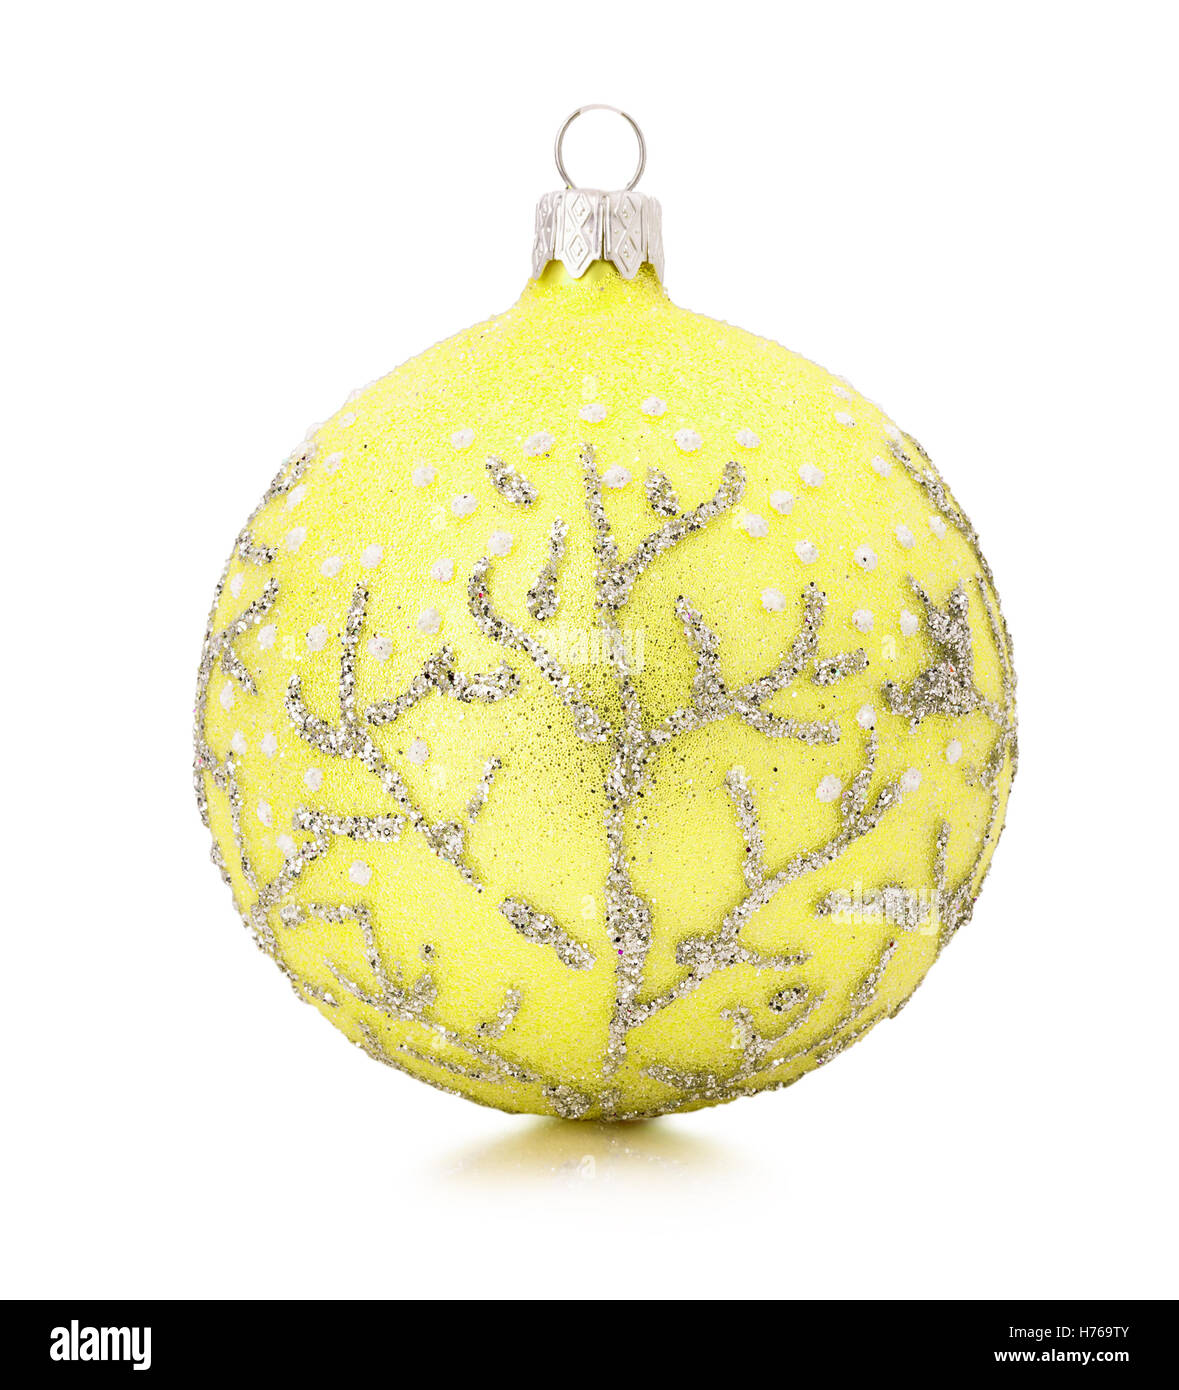 yellow Christmas tree ball isolated on the white background. Stock Photo